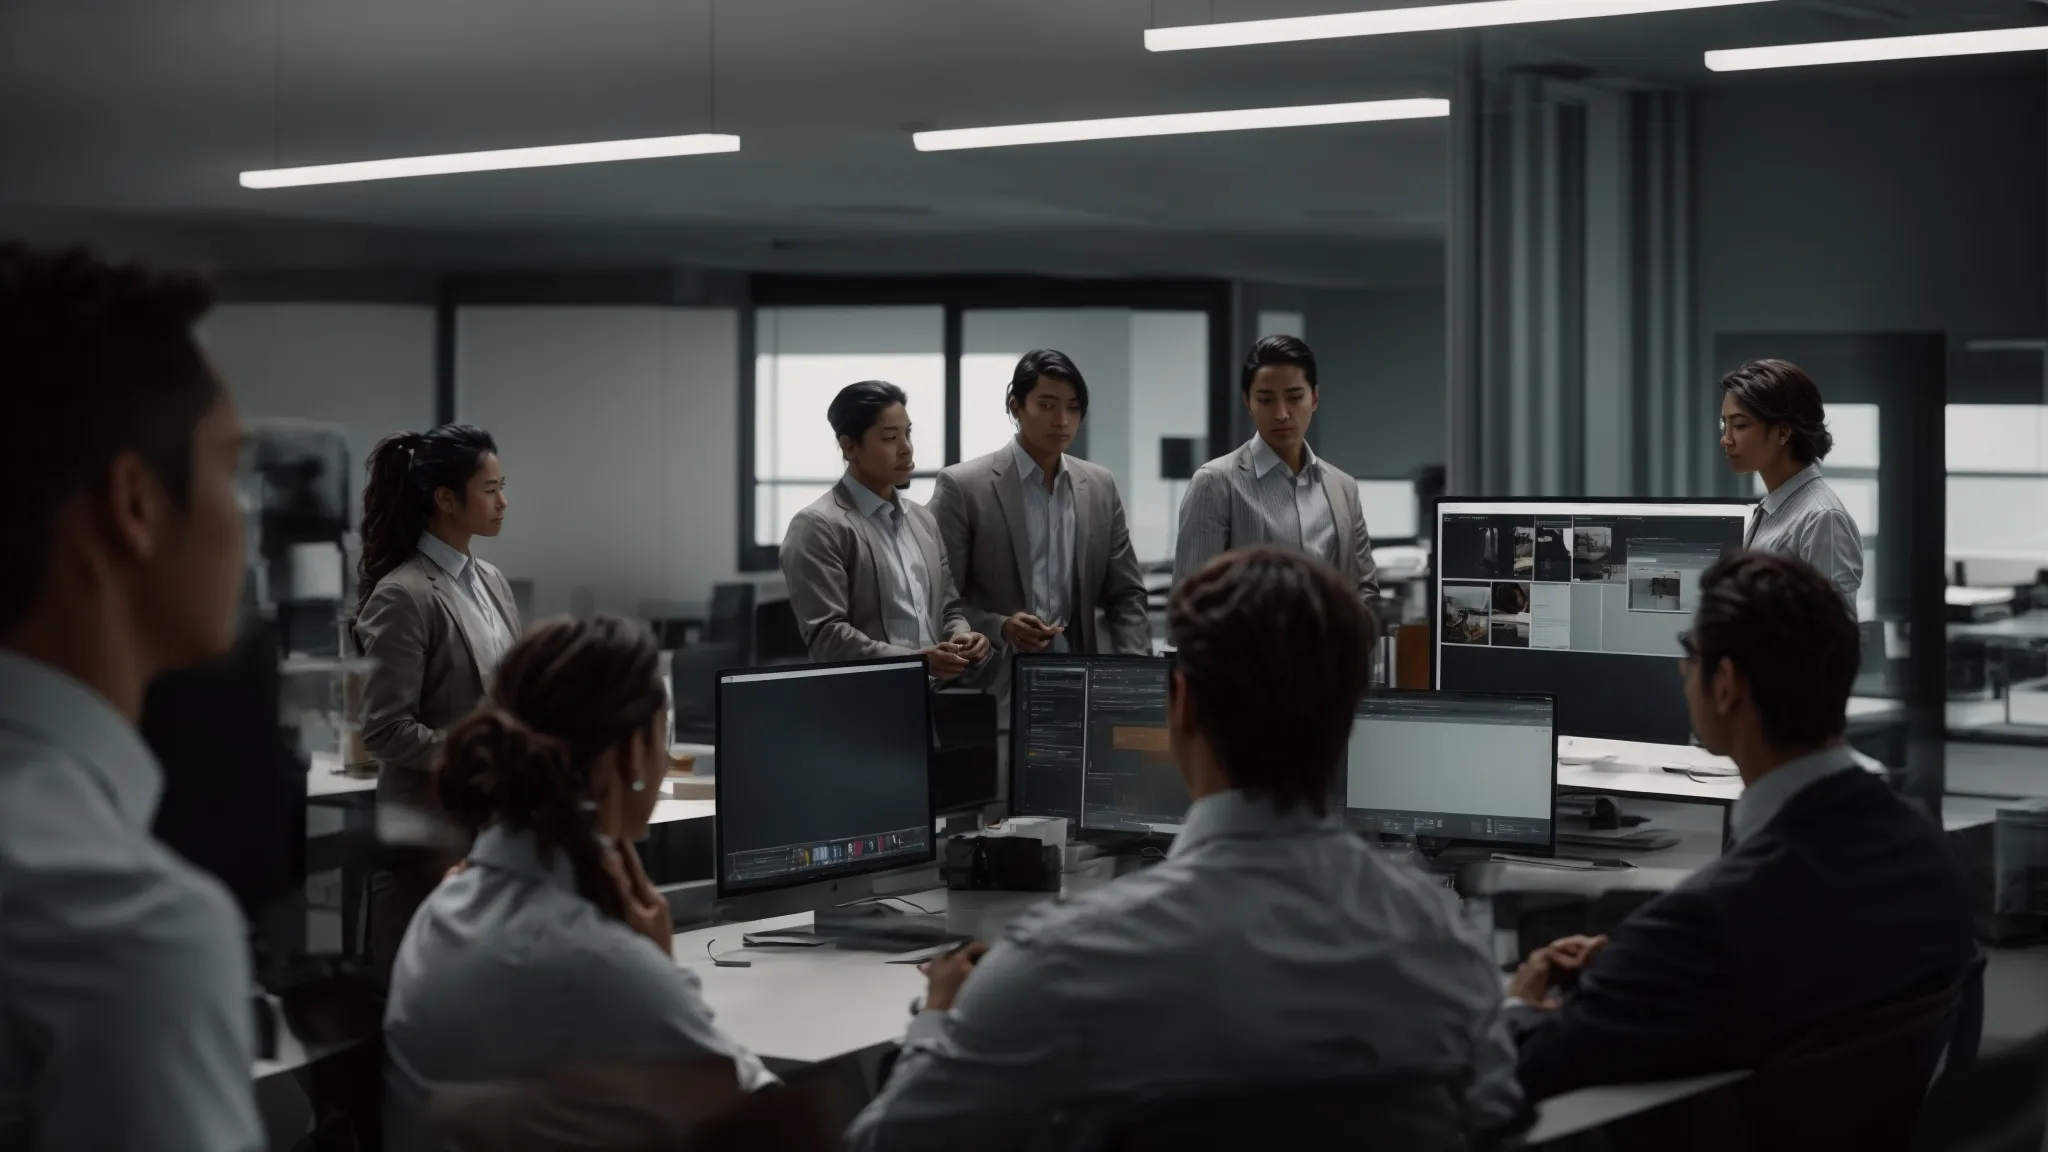 A Team Gathers Around A Sleek Computer In A Modern Office, Discussing An Innovative Web Design Projected On The Screen.